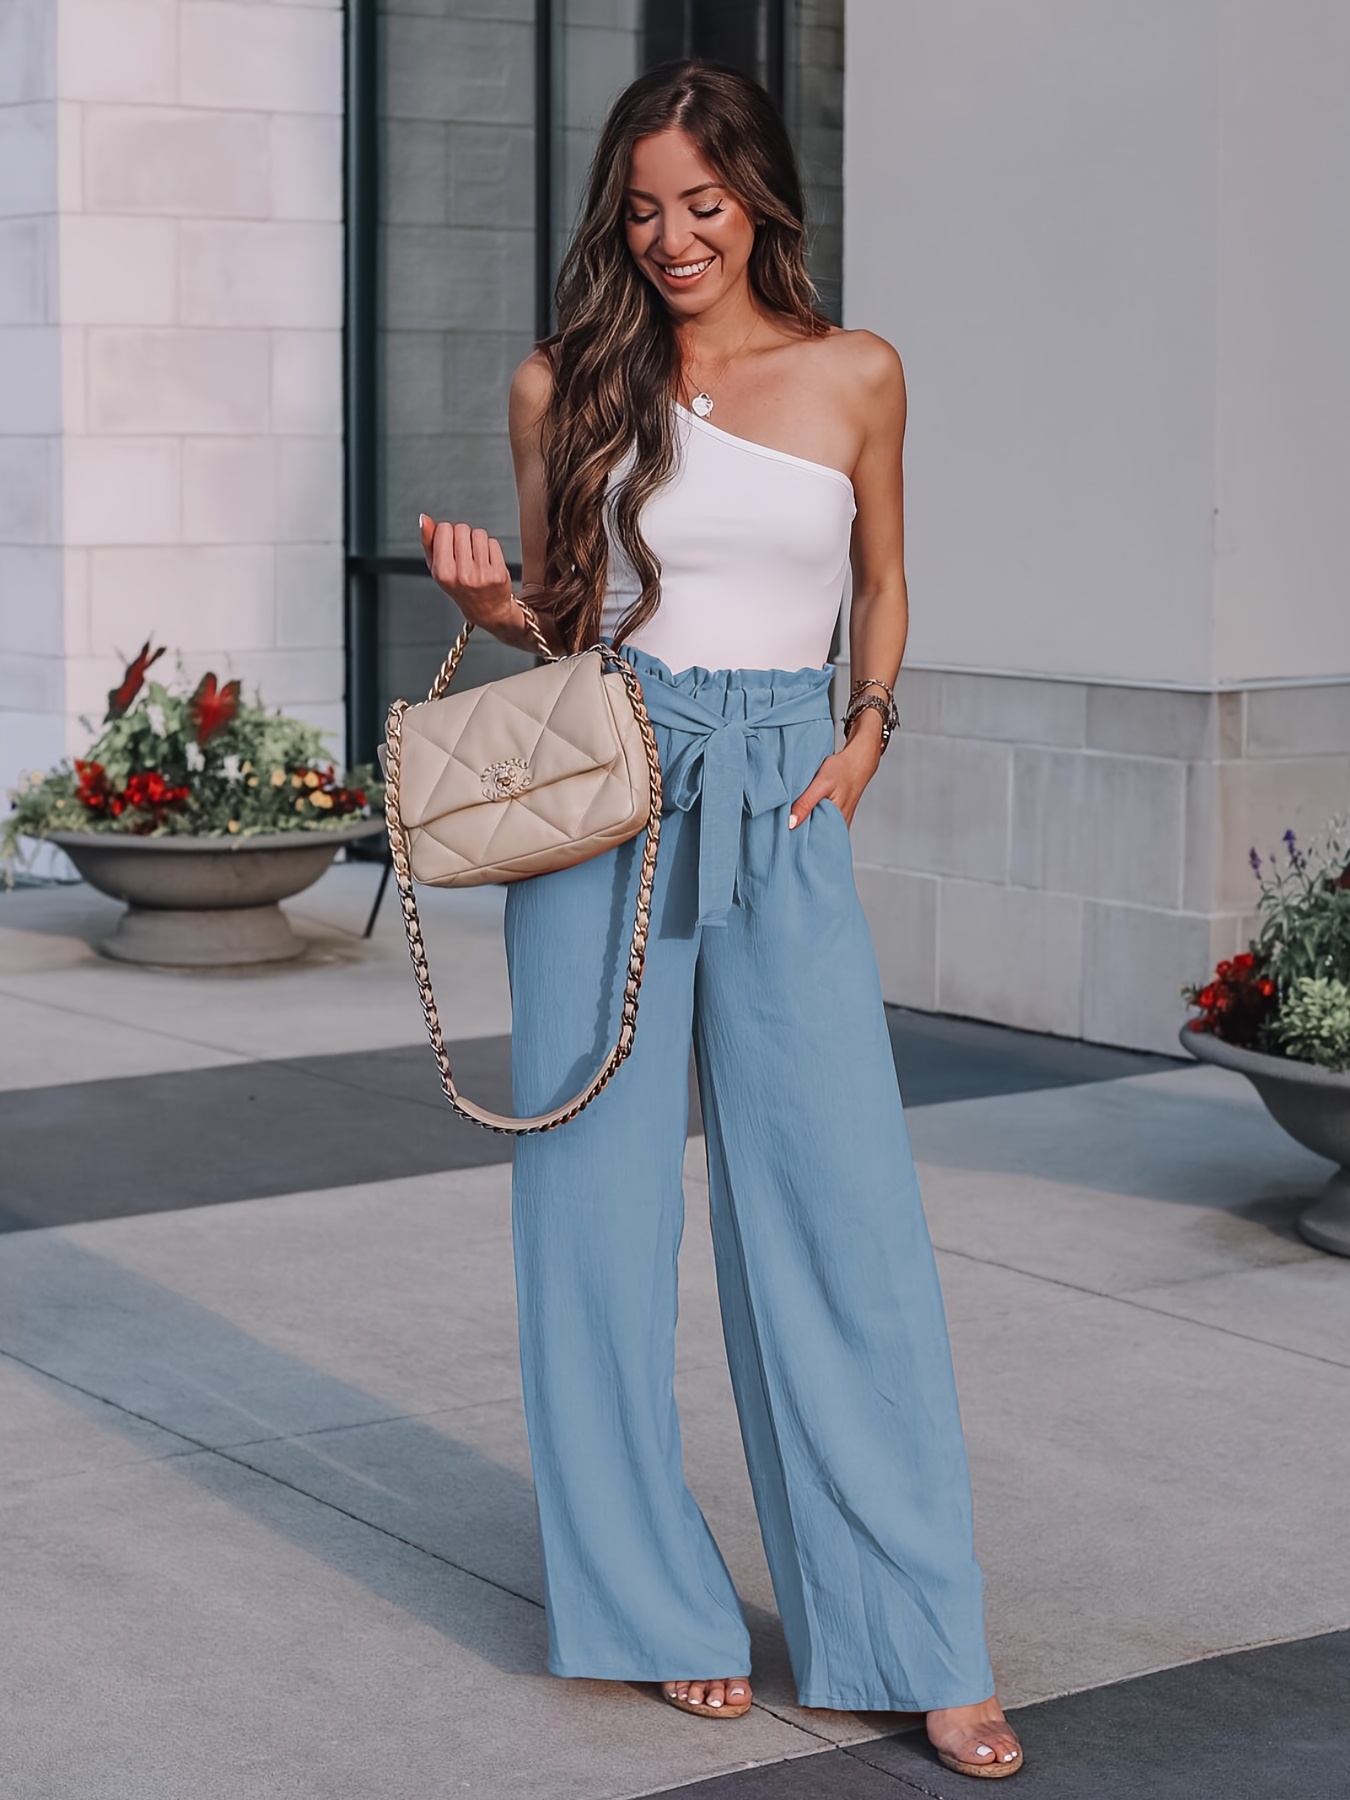 GRAPENT Jeans Womens Pants Dressy Casual Palazzo Pants Summer Pants Flare  Pants for Women Hippie Clothes Business Casual Pants for Women Summer  Outfits Color Air Blue Size S Small Size 4 Size